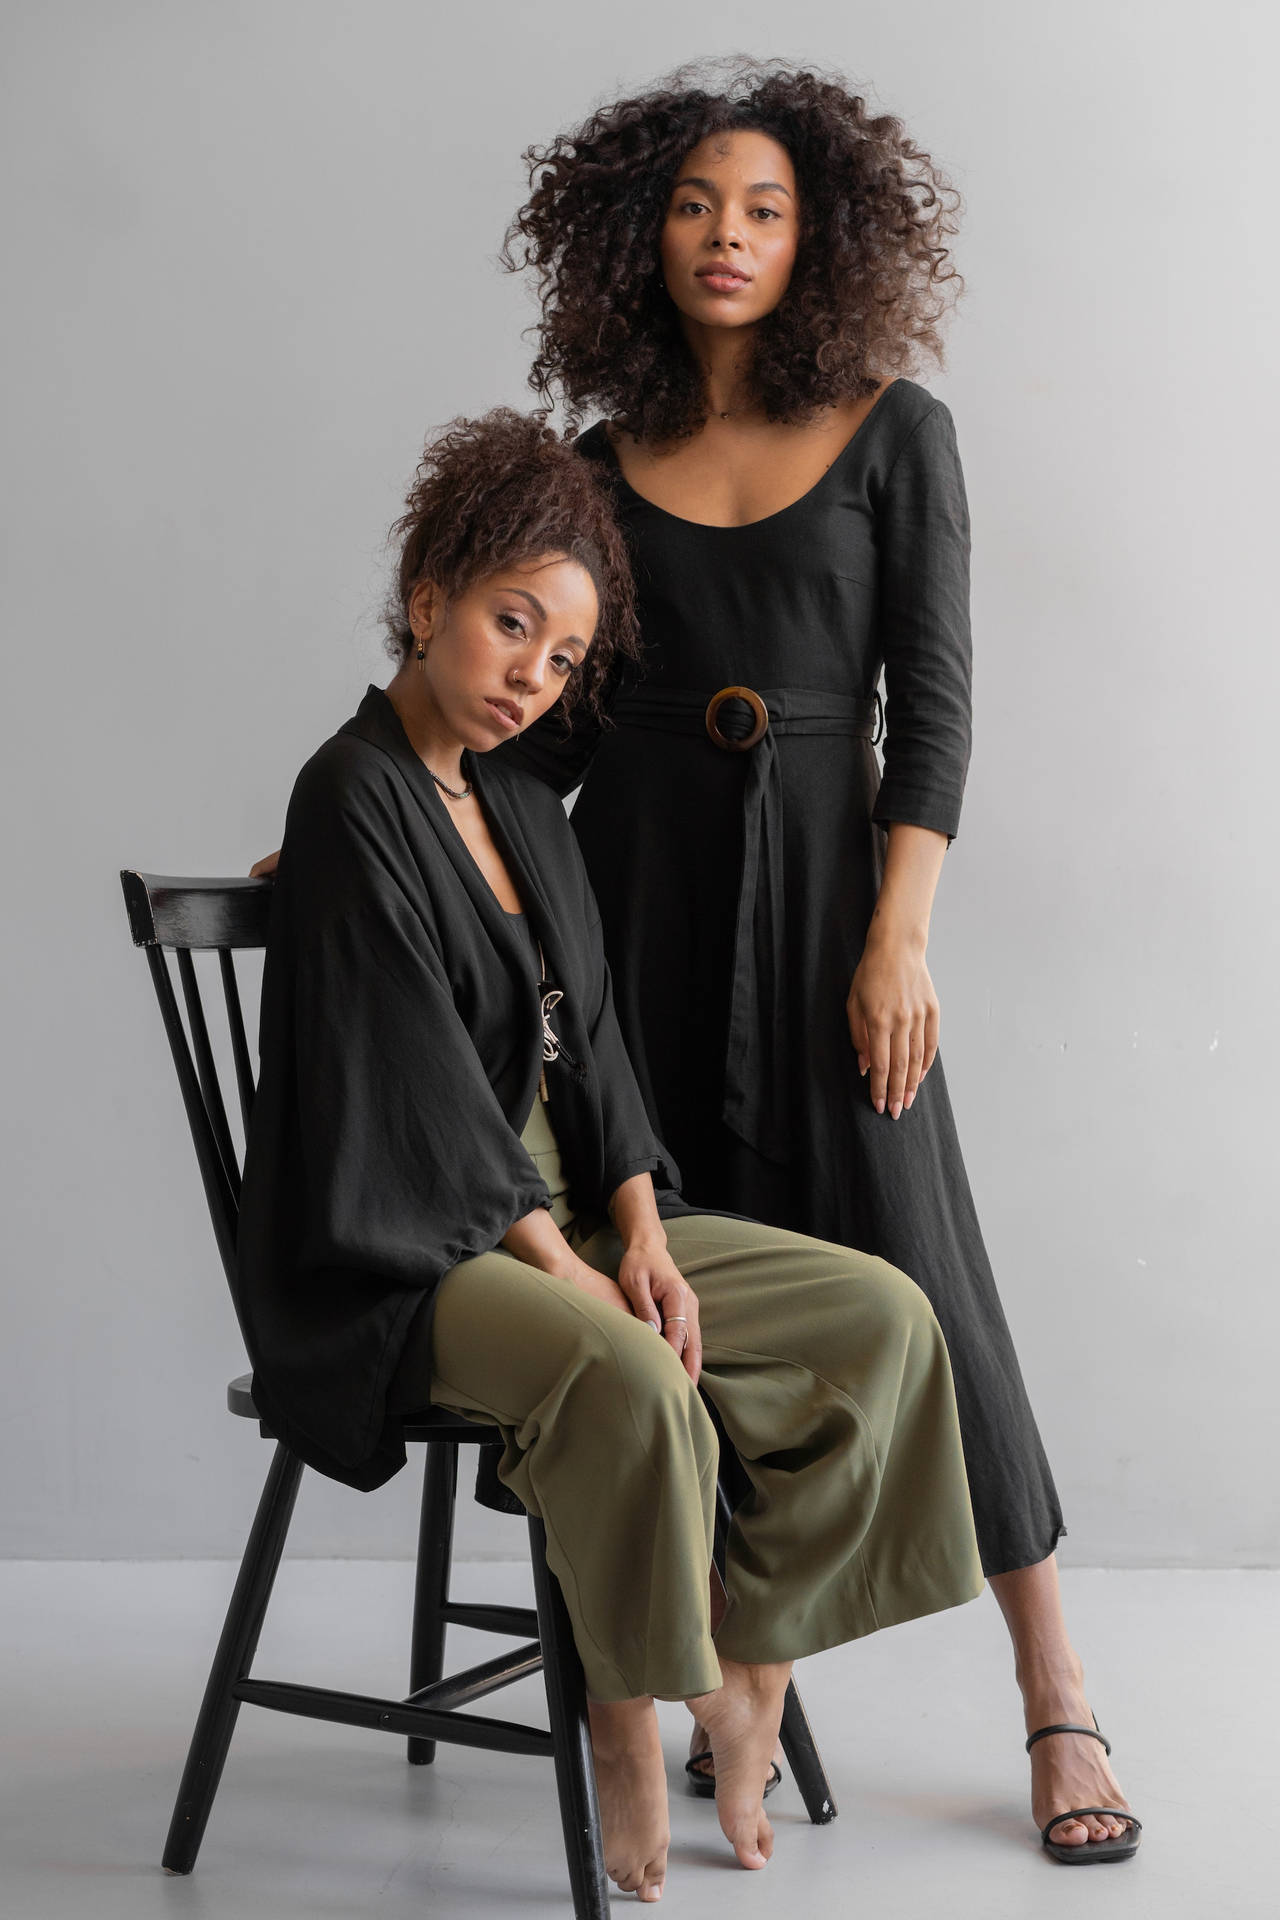 Two Sexy Black Women Modeling On A Chair Wallpaper